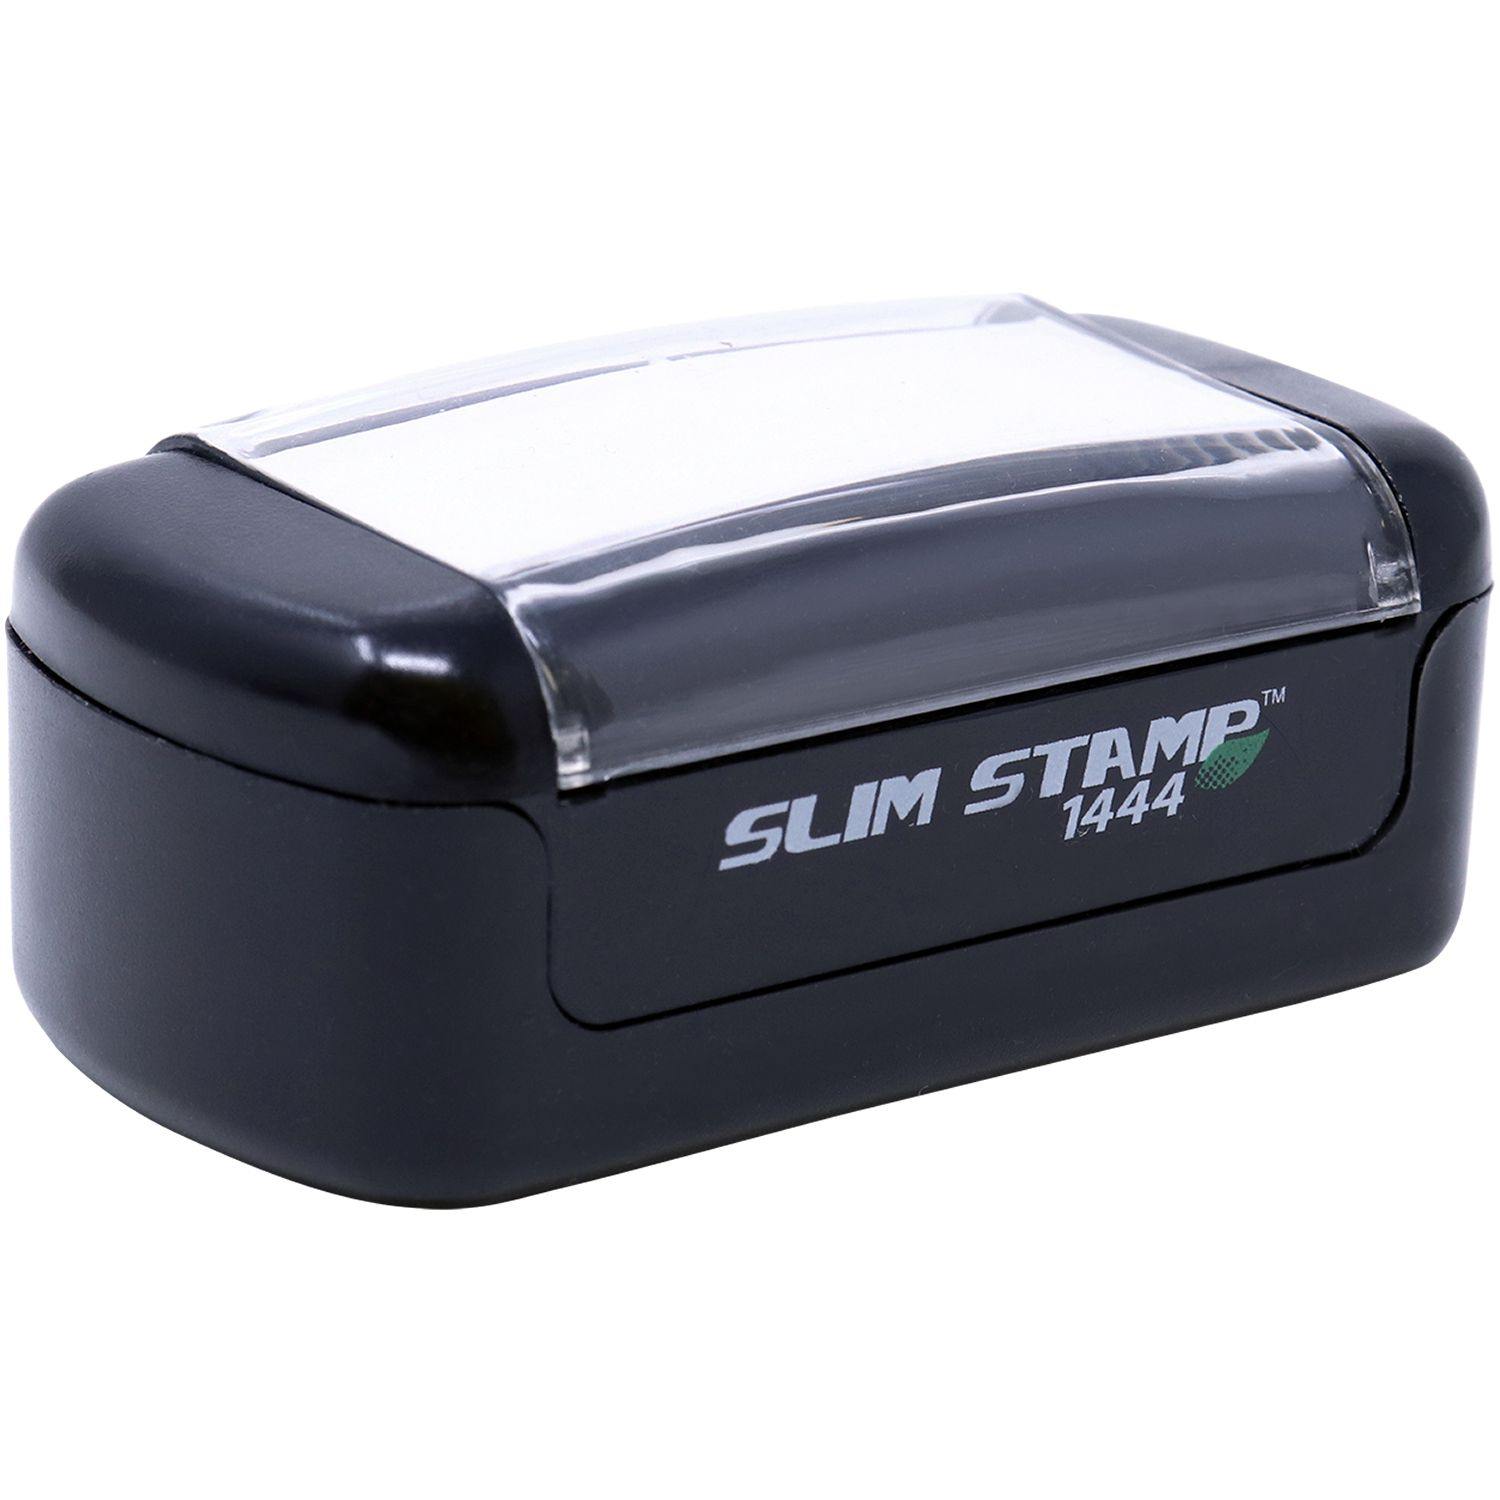 Alt View of Slim Pre-Inked Narrow Font Non-Smoker Stamp Mount Angle